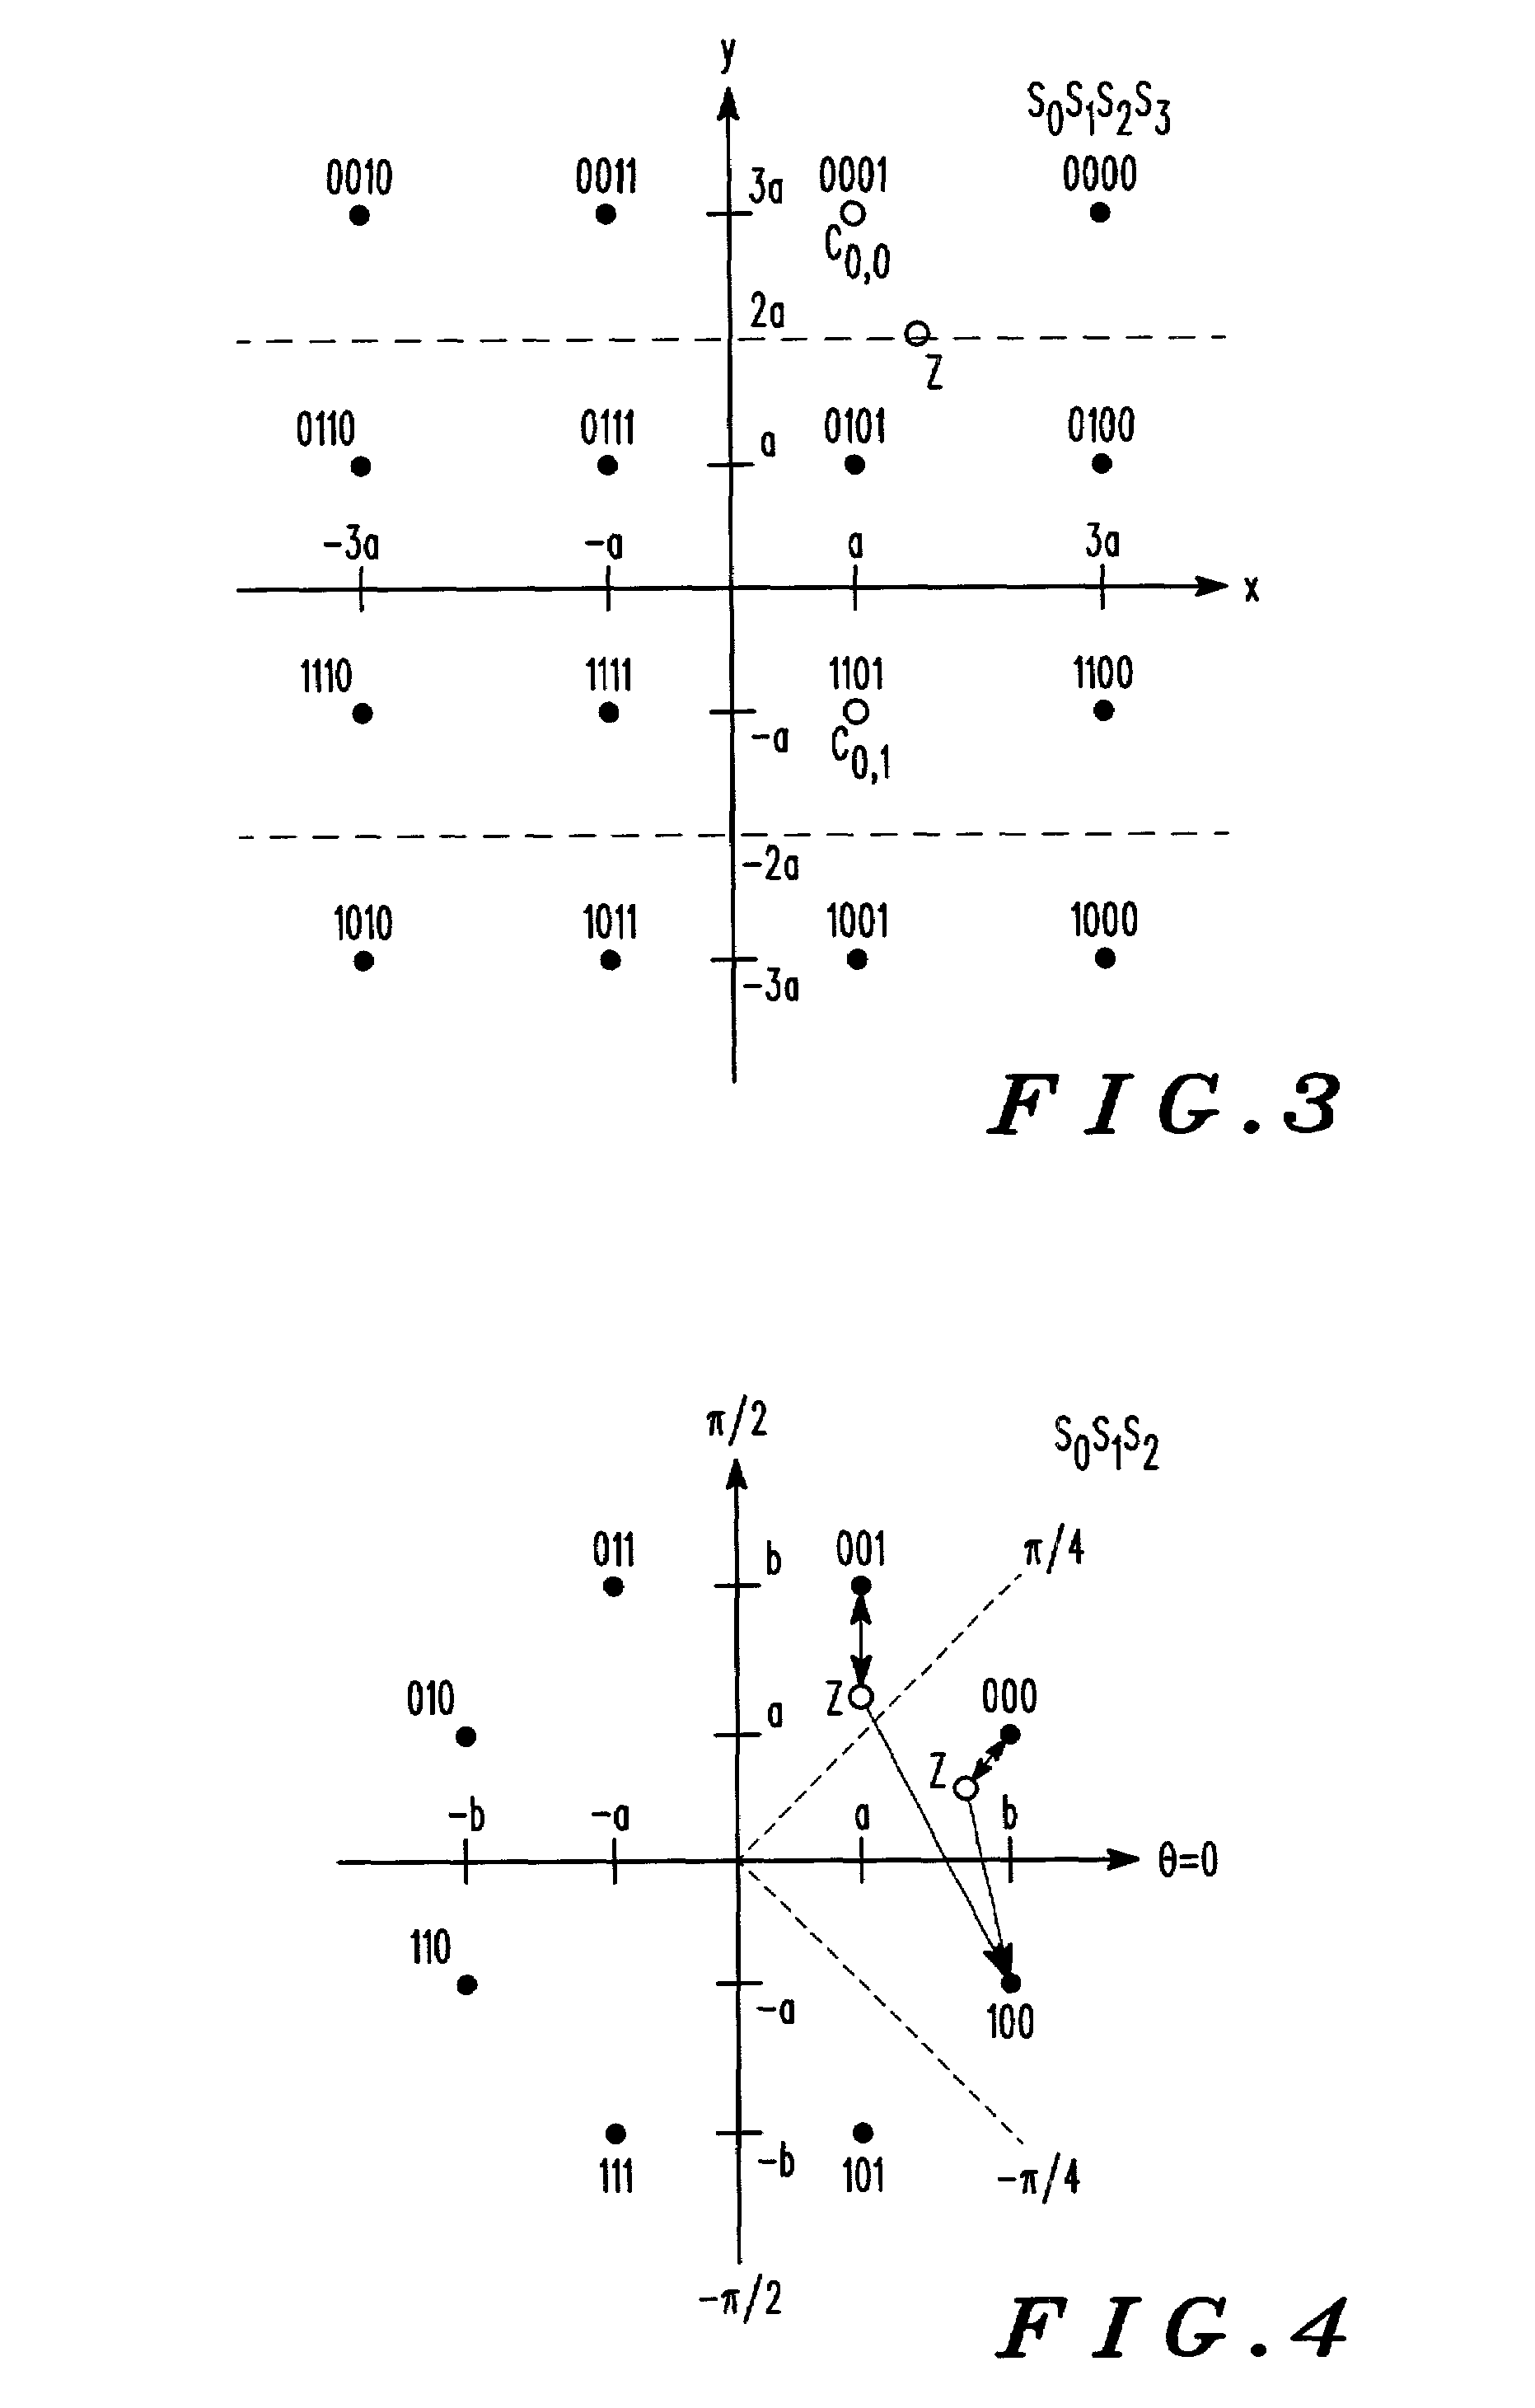 Soft-decision metric generation for higher order modulation